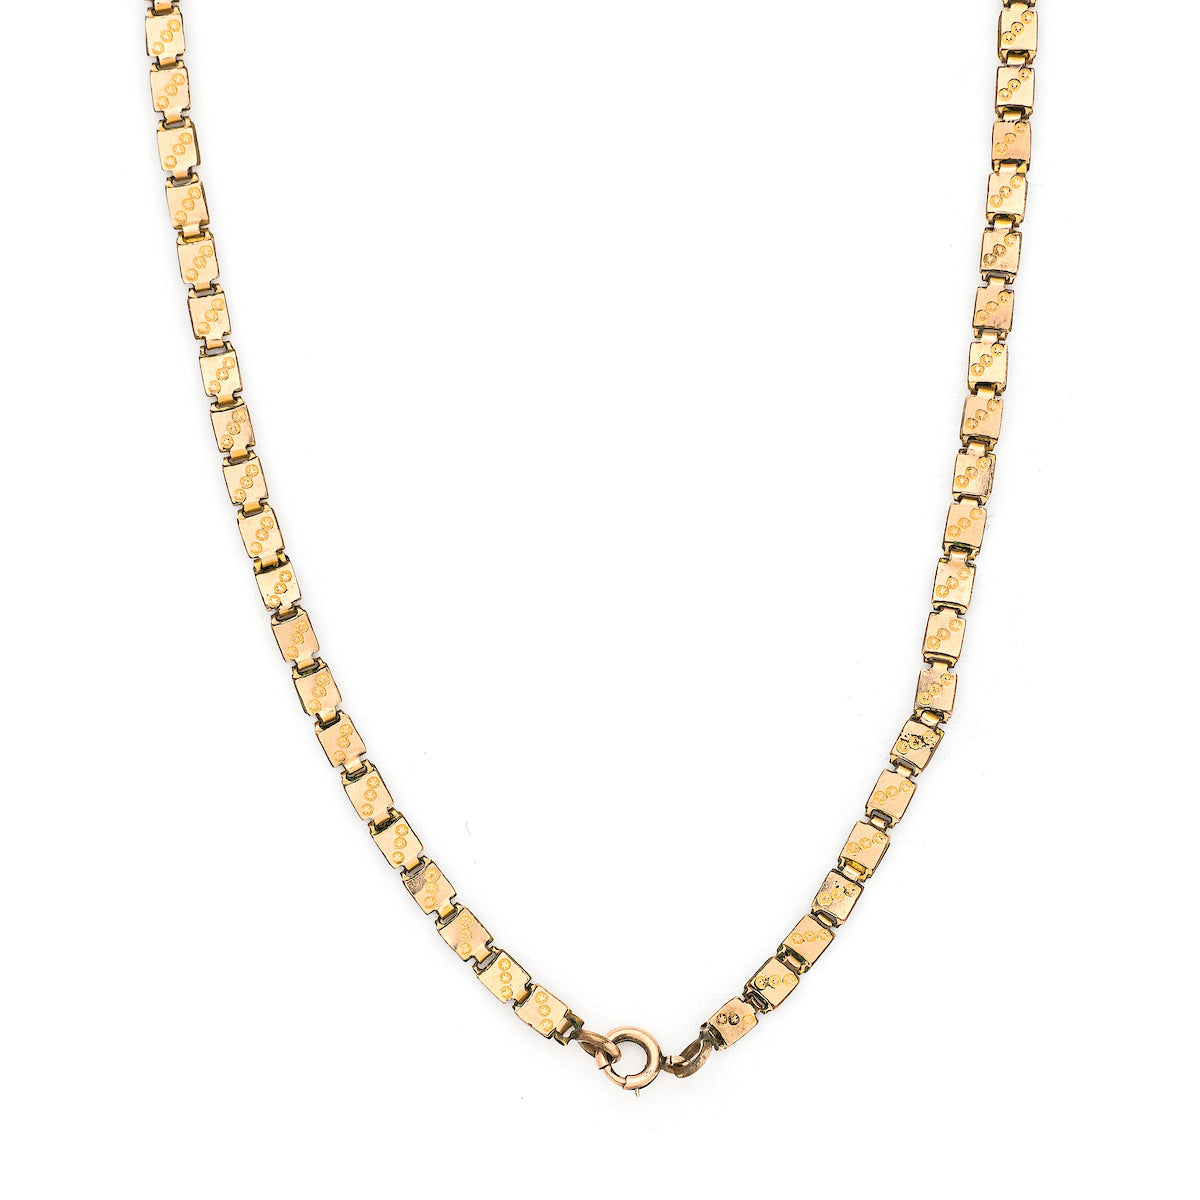 Victorian Gold Mesh Chain Link Necklace